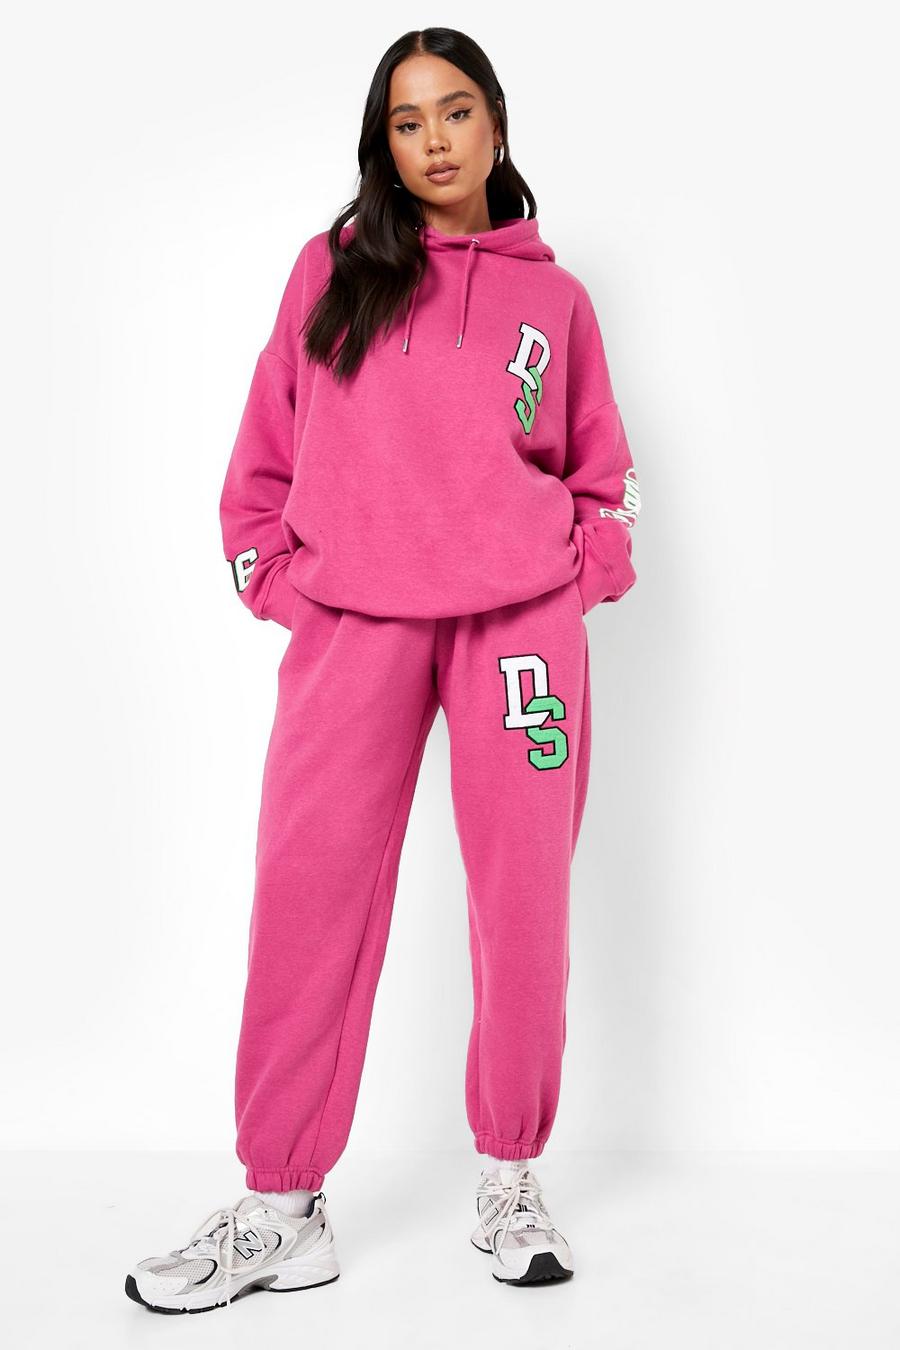 Magenta rose Petite Embroidered Hoody Tracksuit